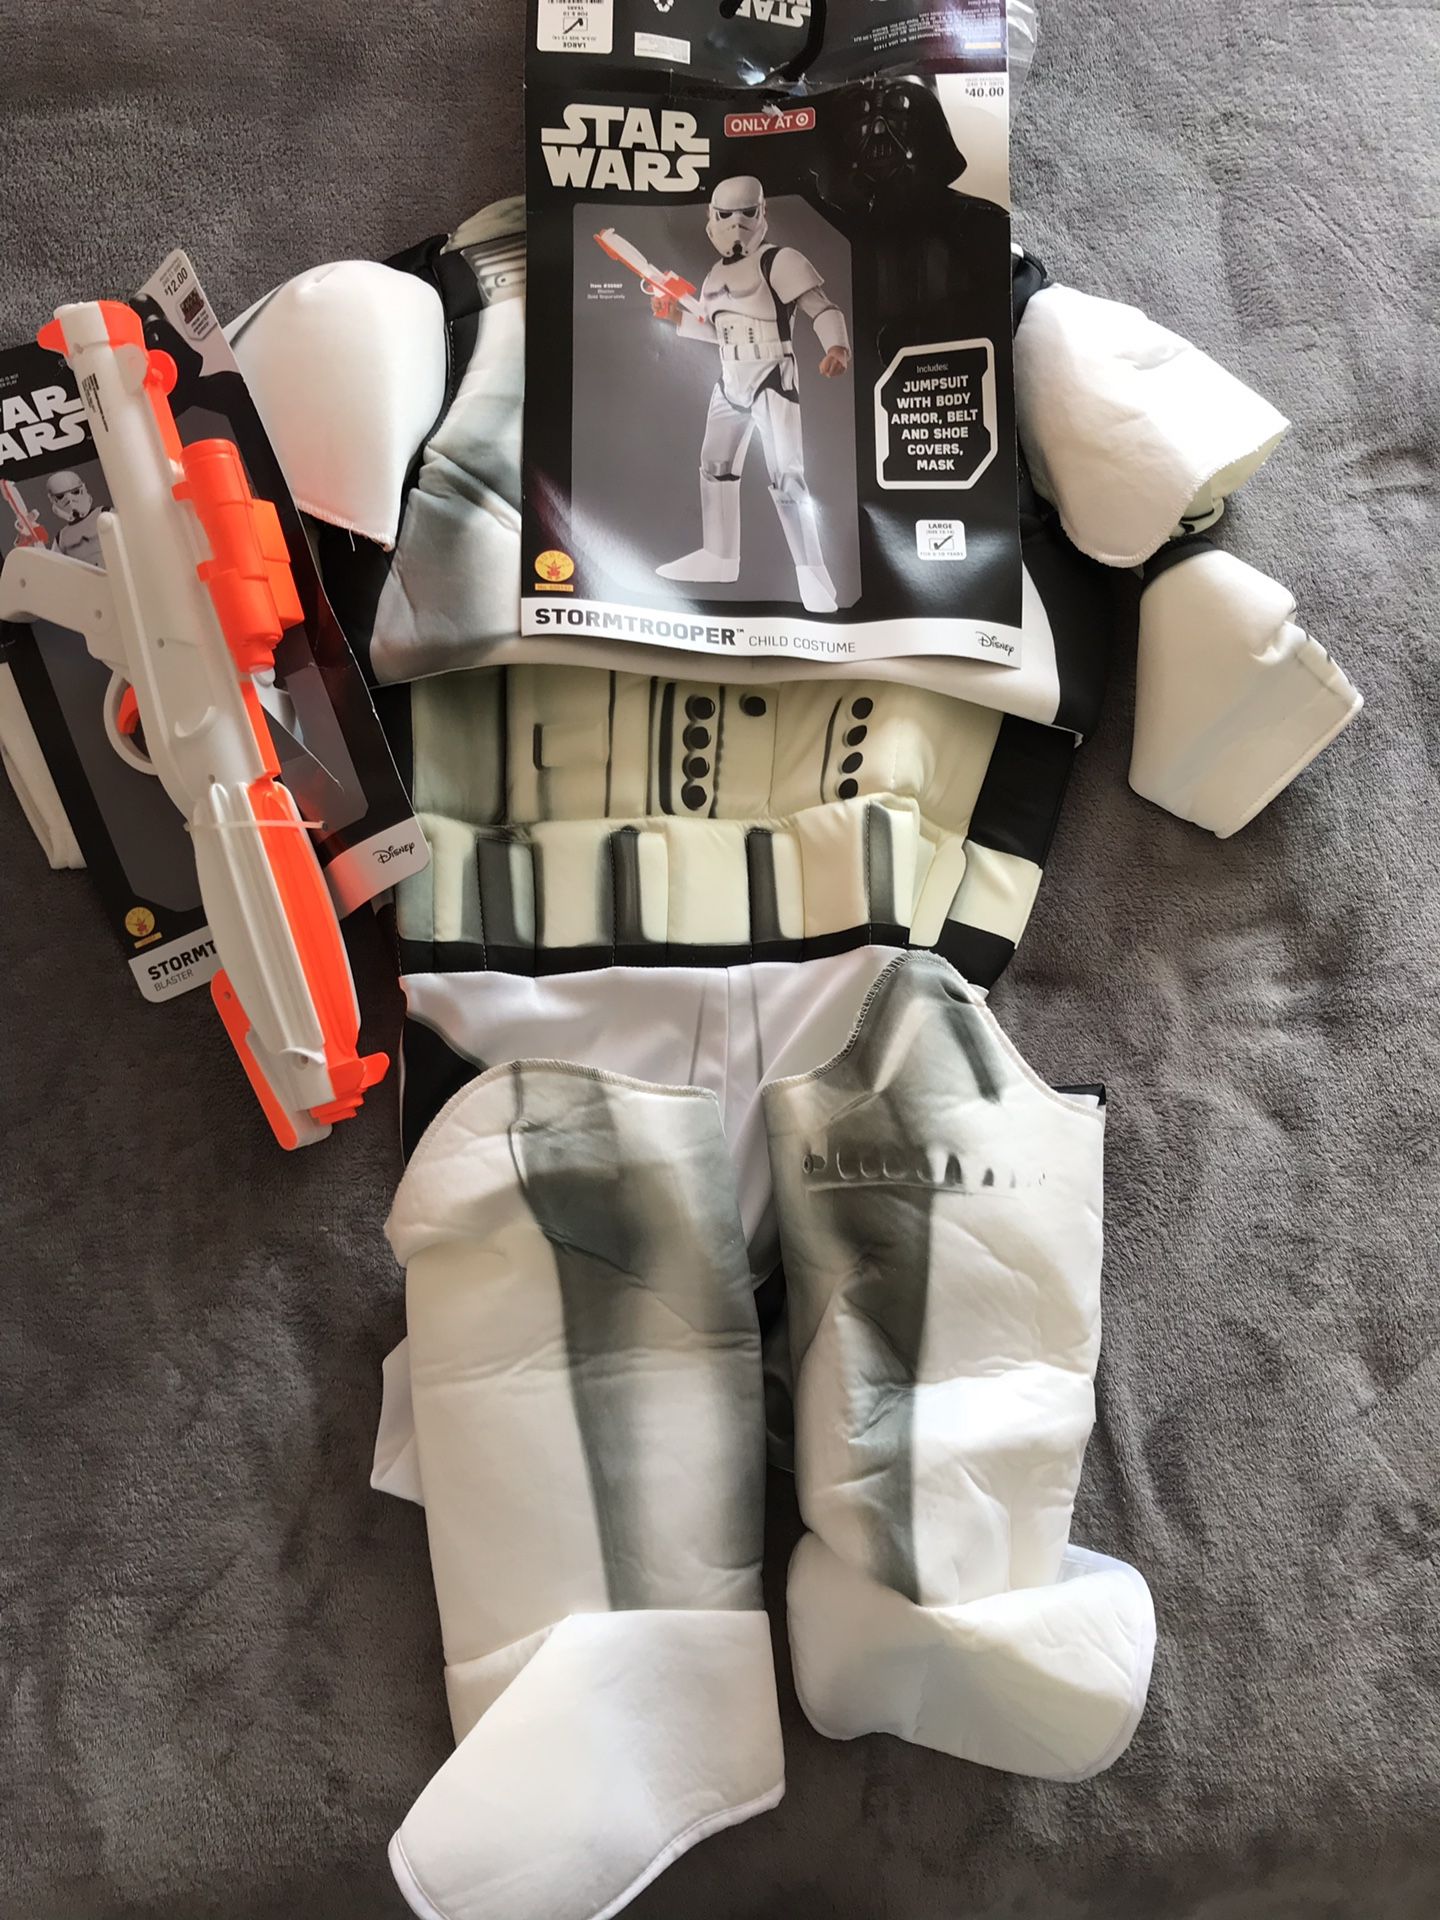 Disney STAR WARS STORMTROOPERS Children’s Halloween Boys Costume with BLASTER Size LARGE 10-12